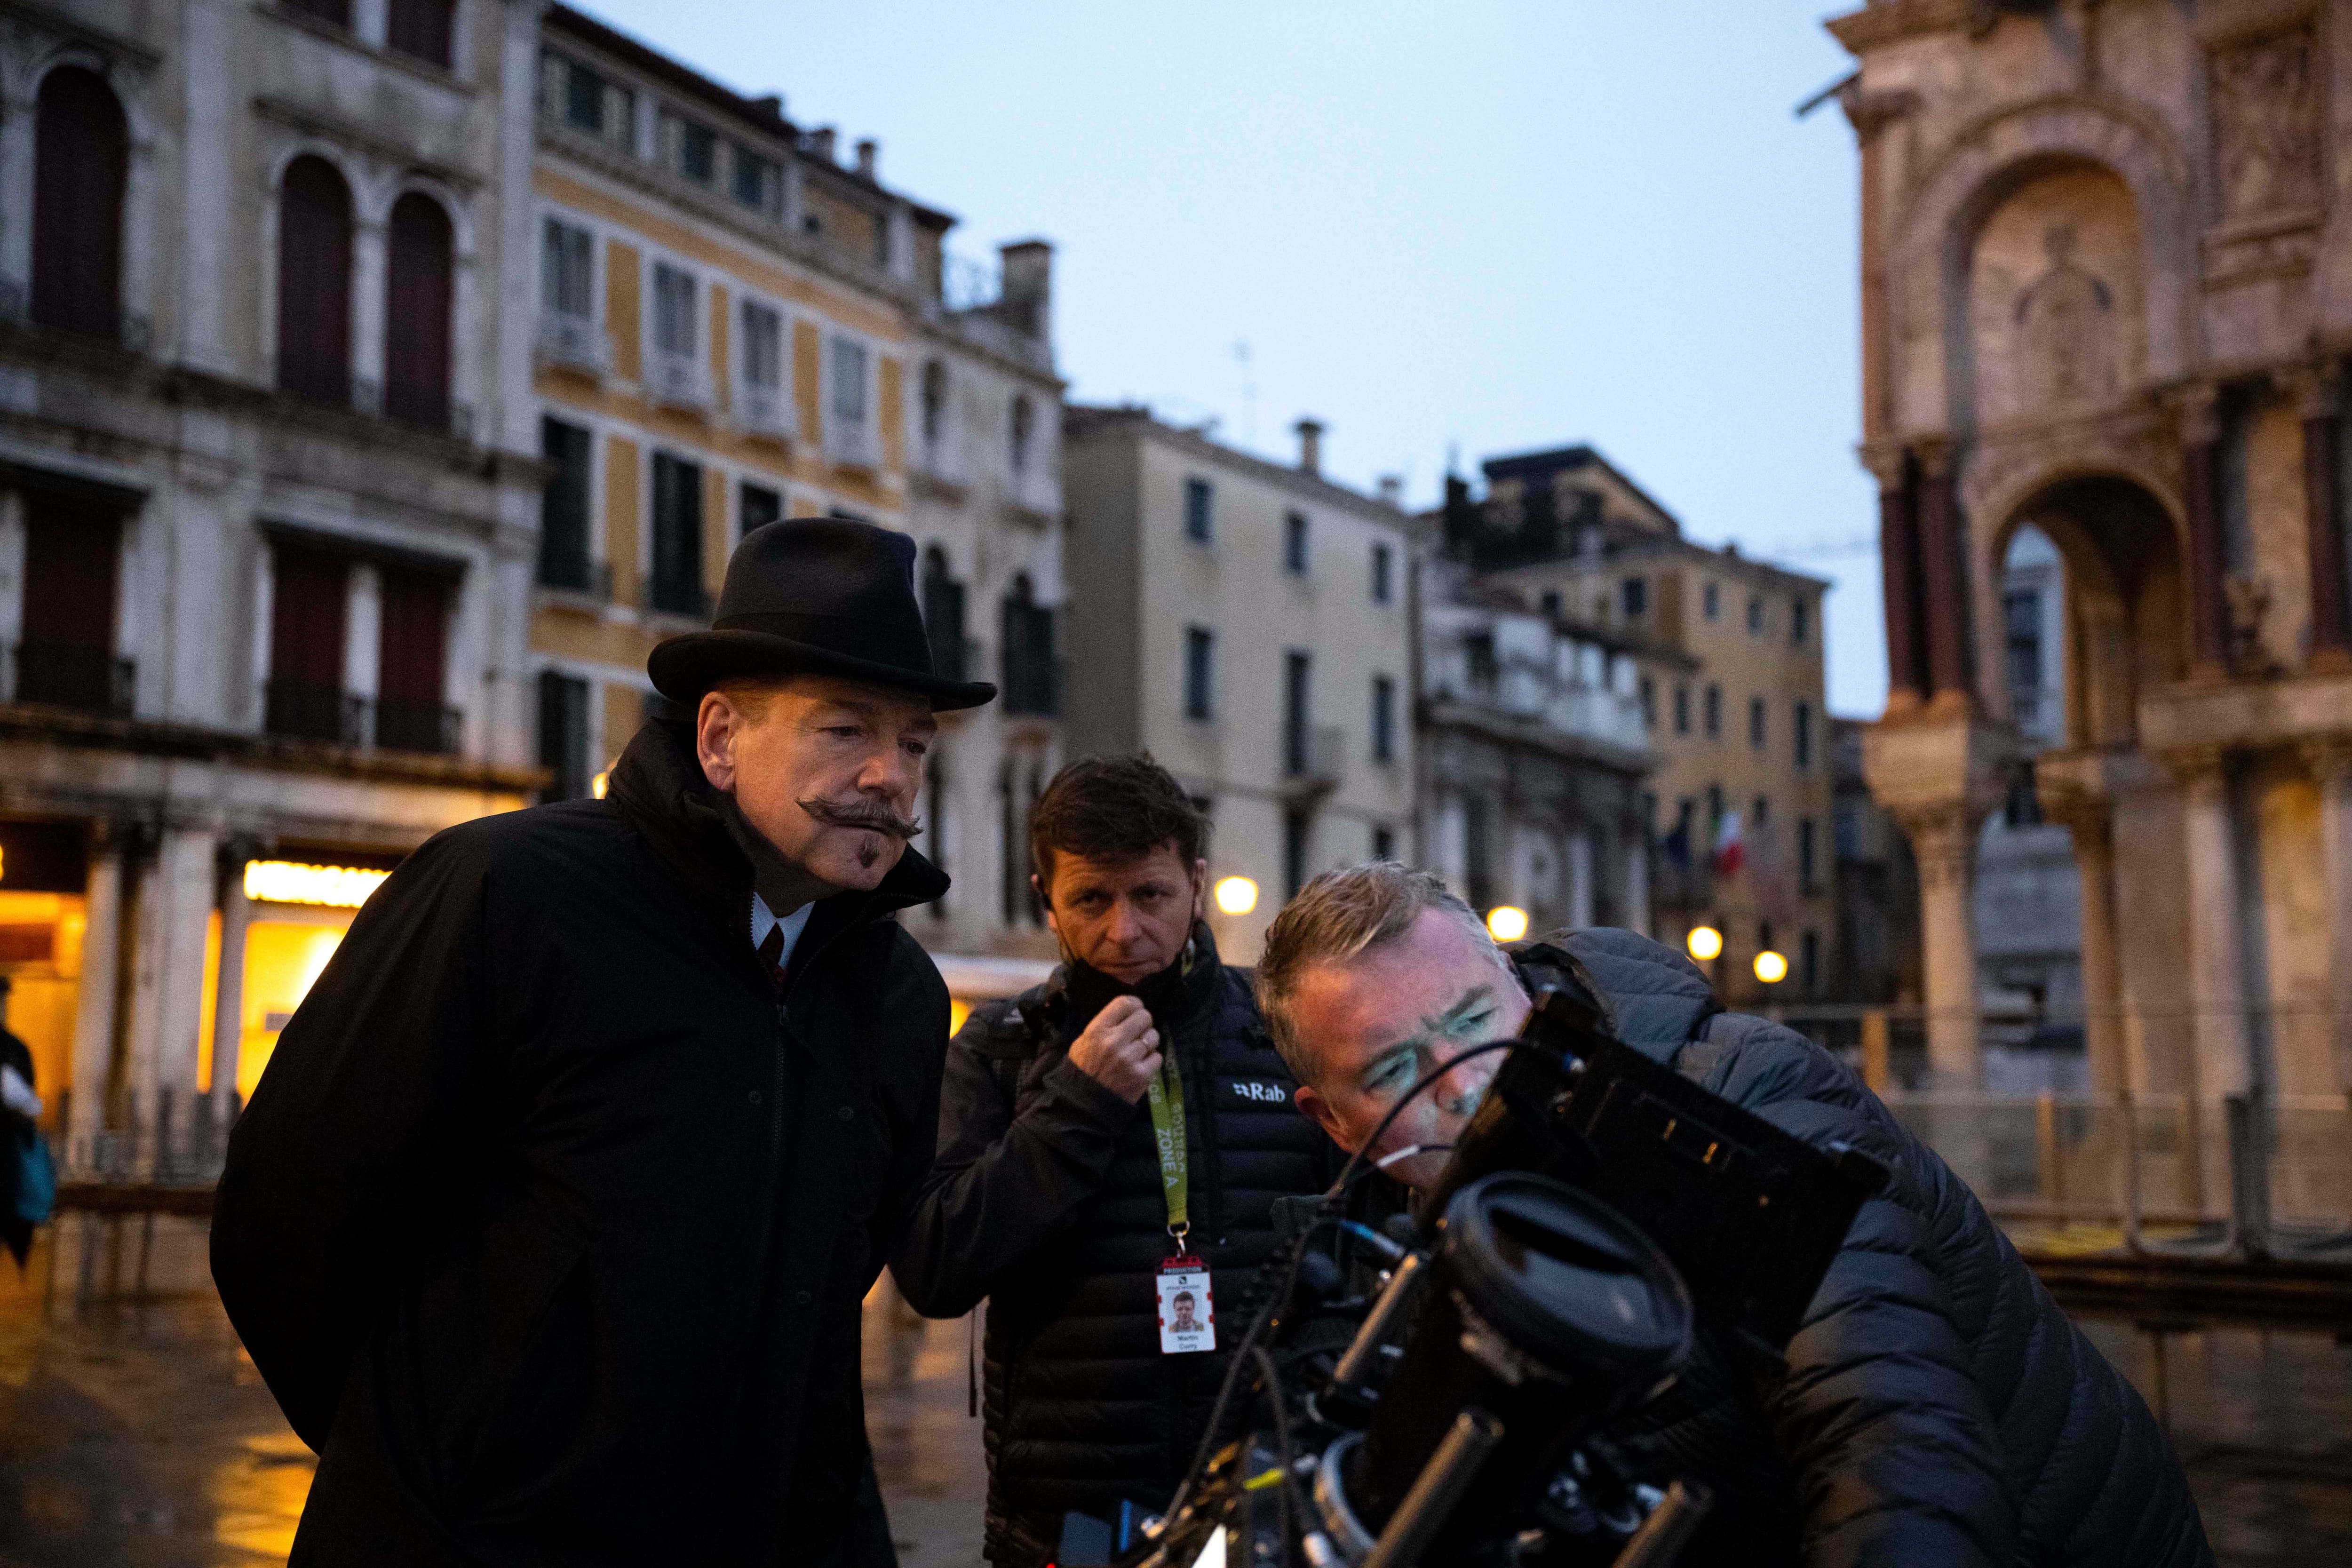 (L-R): Director Kenneth Branagh as Hercule Poirot and crew on the set of 20th Century Studios' A HAUNTING IN VENICE. Photo by Rob Youngson. © 2023 20th Century Studios. All Rights Reserved.